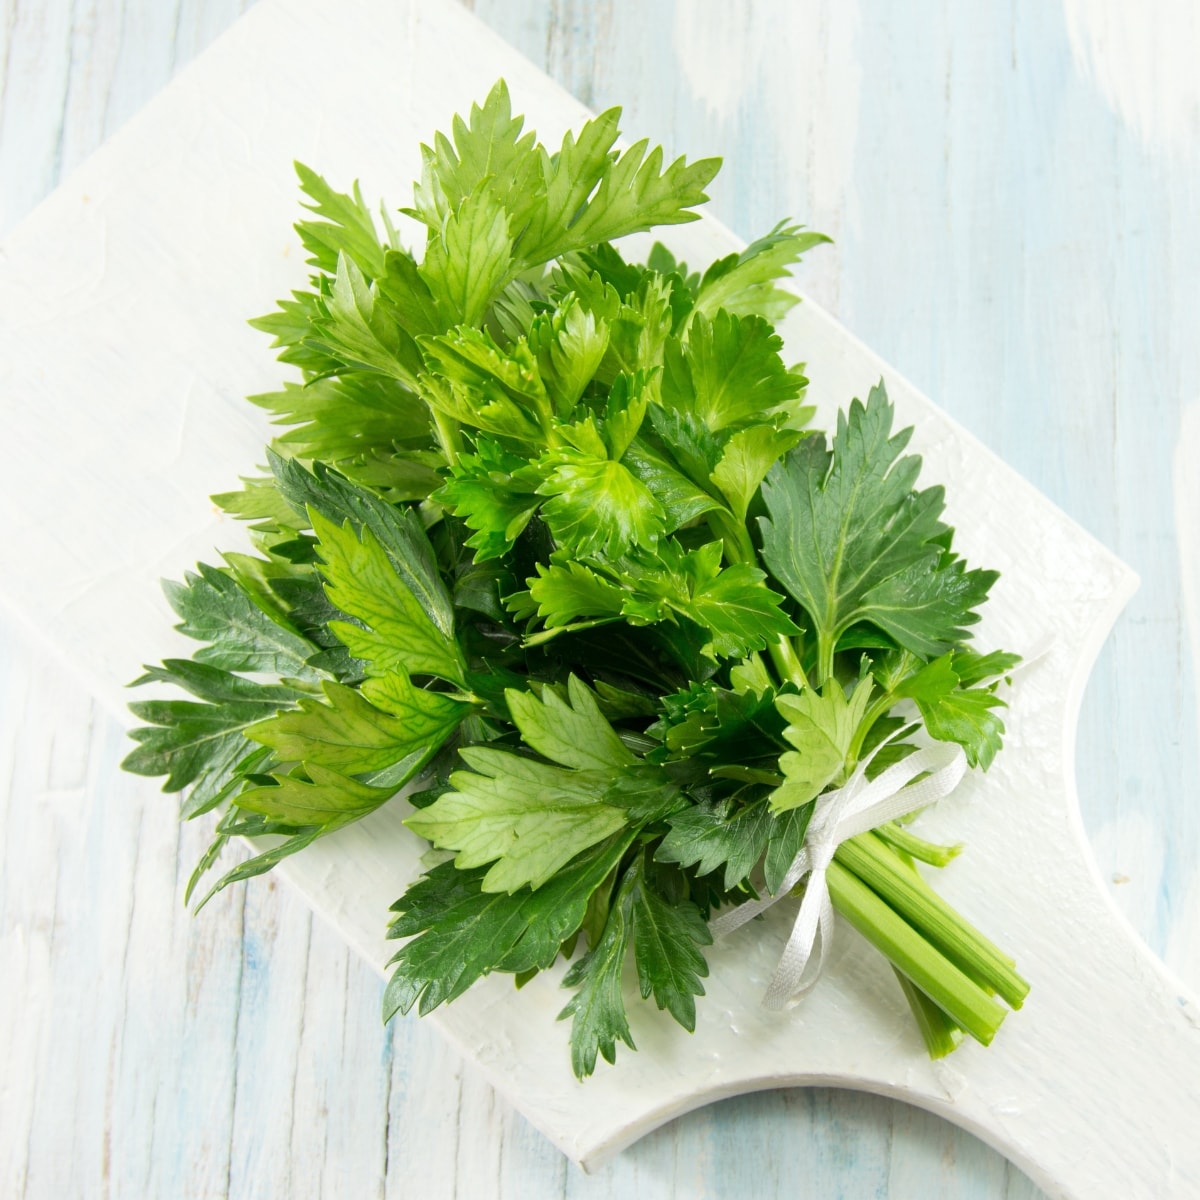 Fresh Celery Leaves Tied on a Wooden Cutting Board